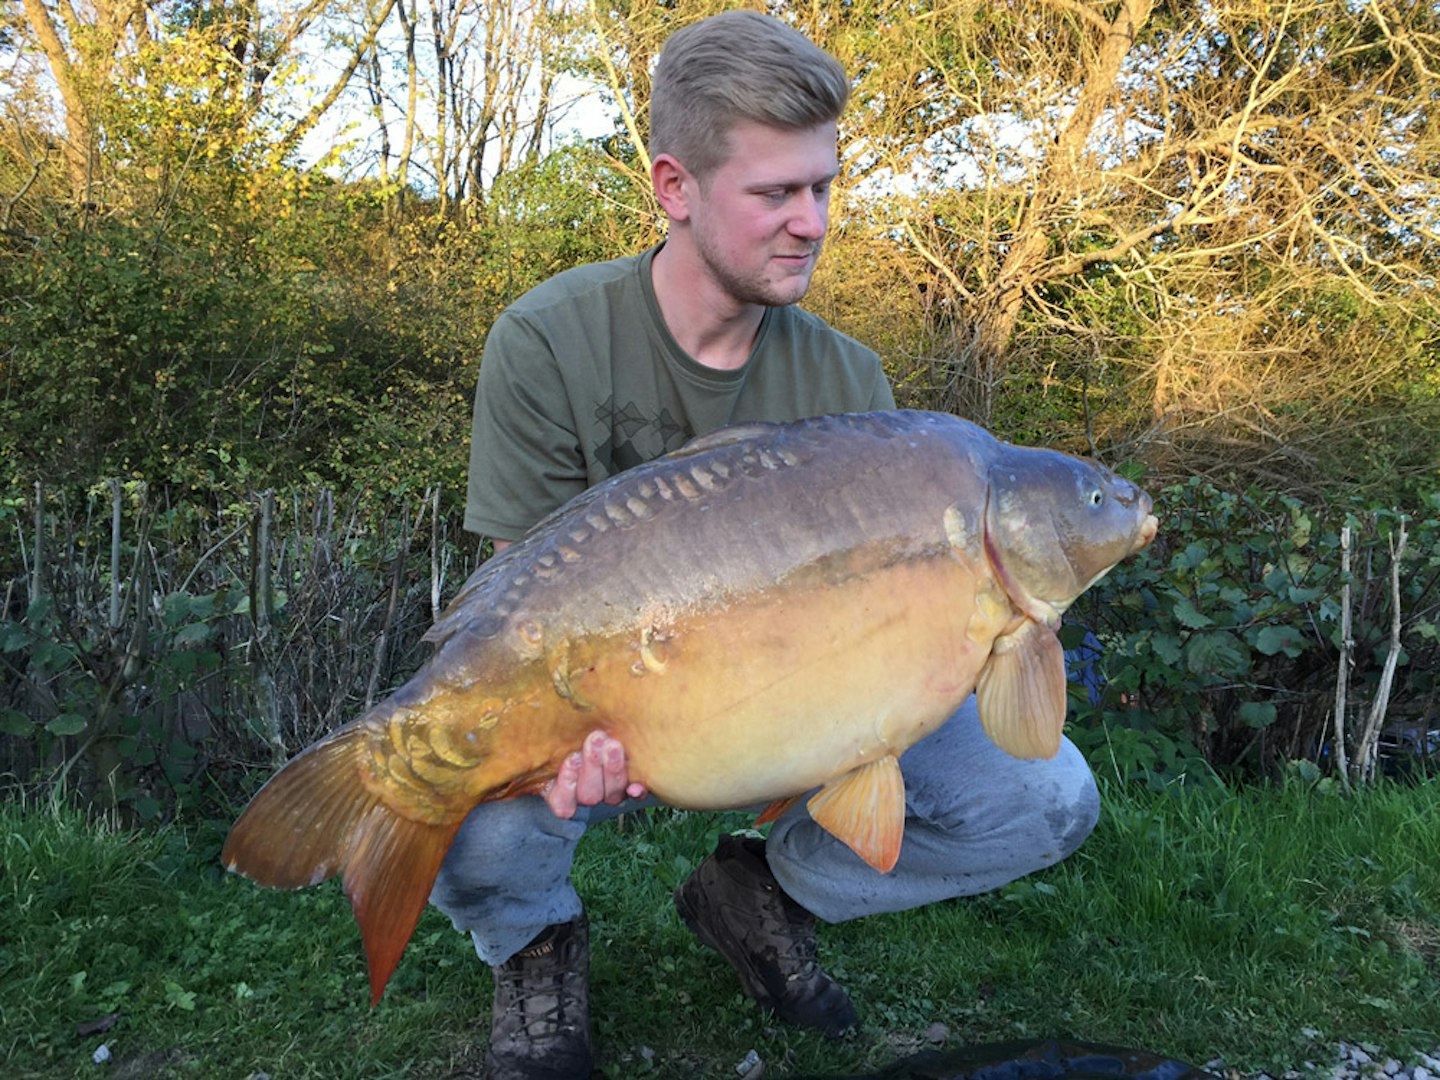 Dan Wickens with a 30